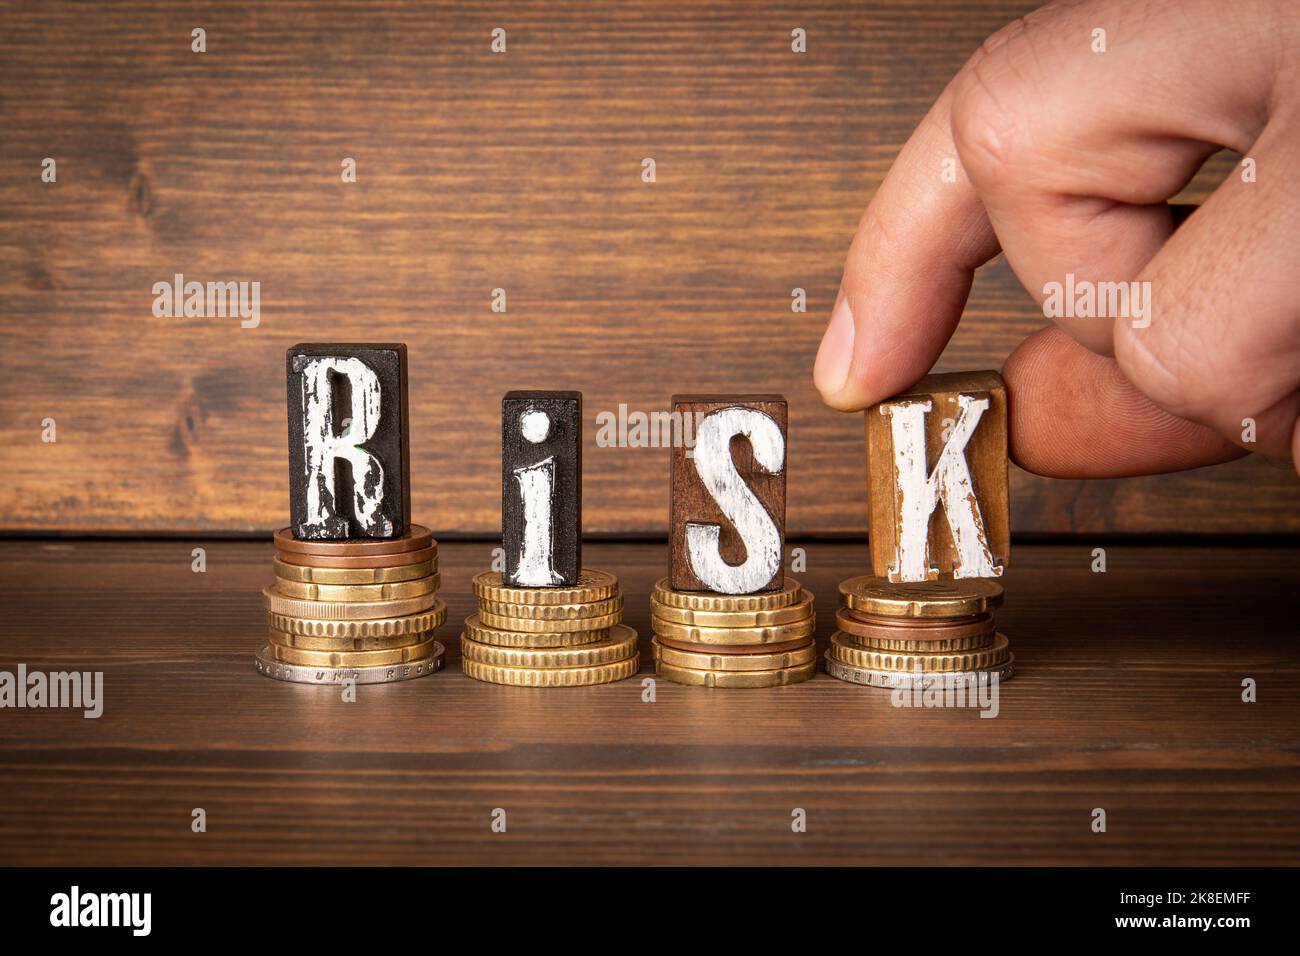 Risk. Business, finance and crisis concept. Change and alphabet blocks on wooden background. Stock Photo